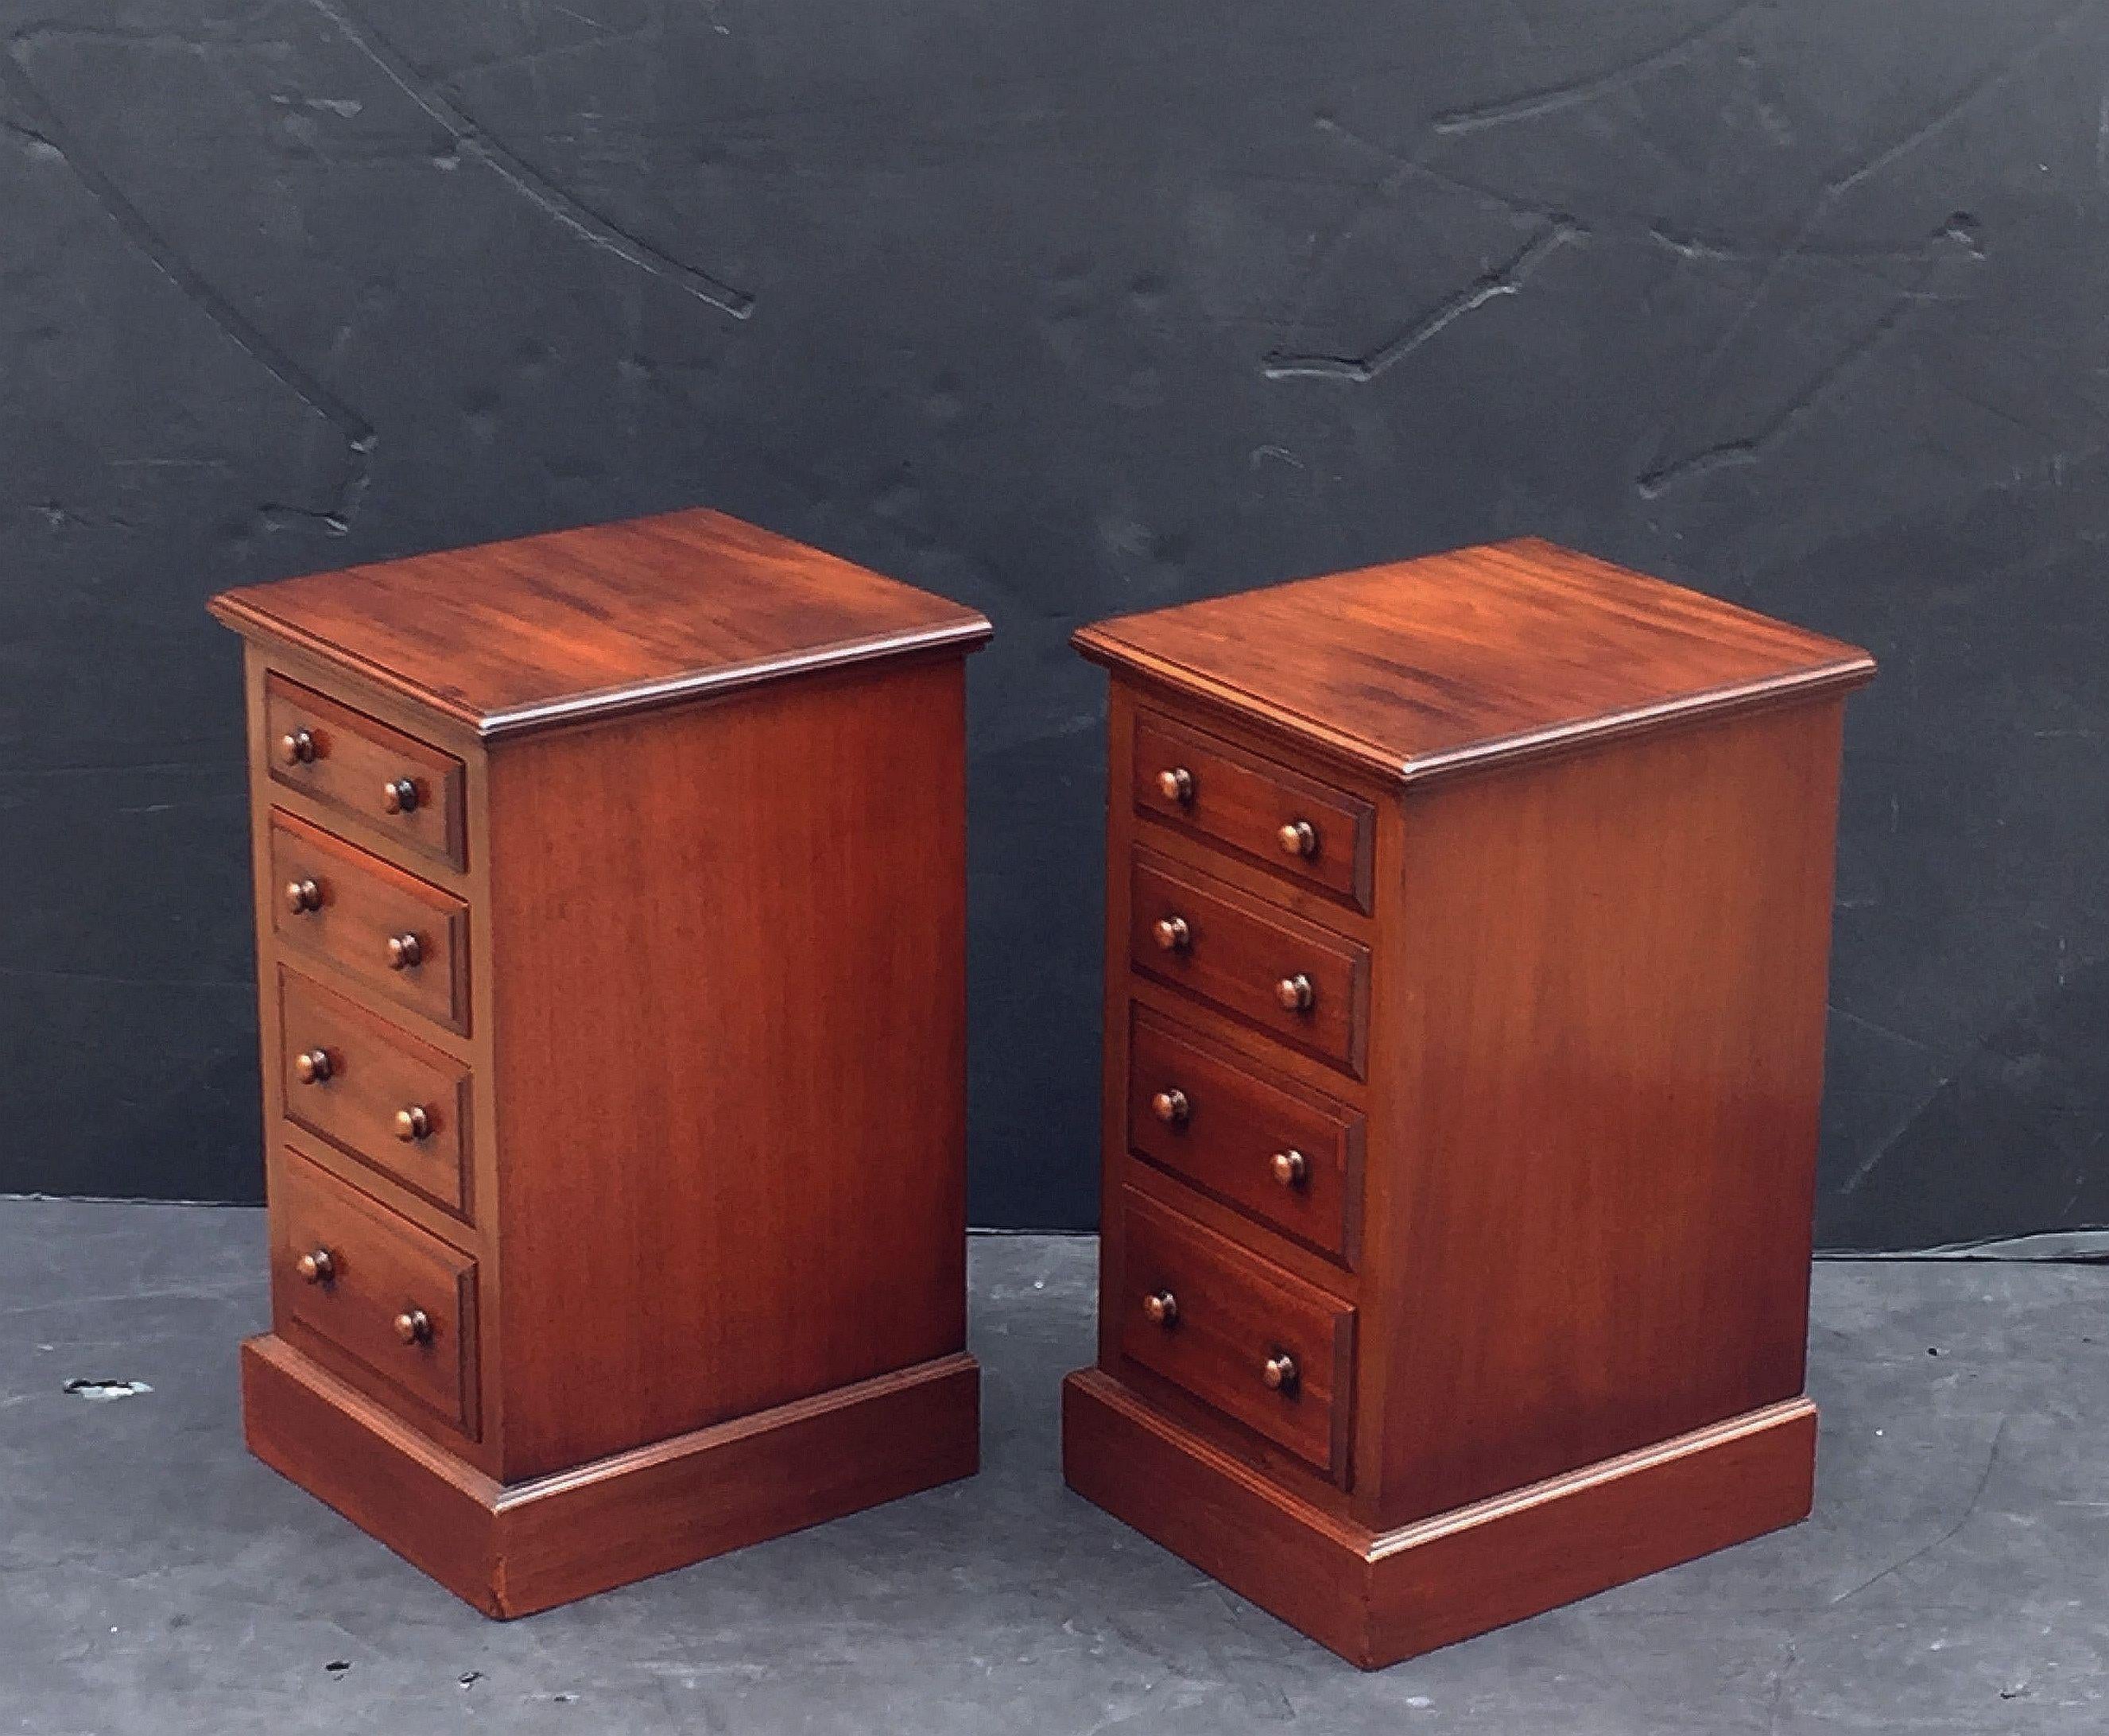 Wood English Bedside Chests or Cabinet Nightstands of Mahogany - 'Priced as a Pair'